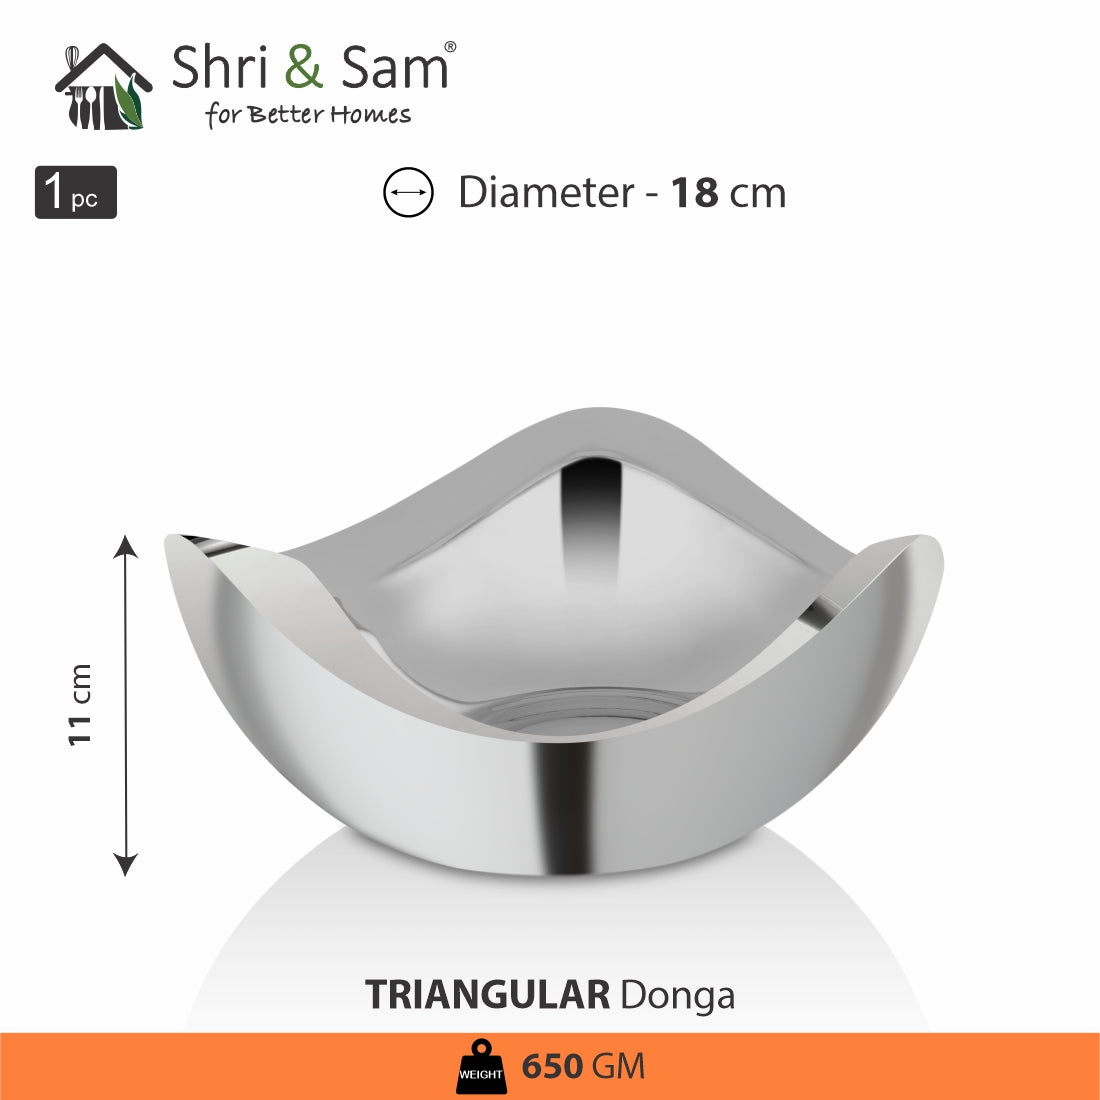 Stainless Steel Double Wall Triangular Salad Donga